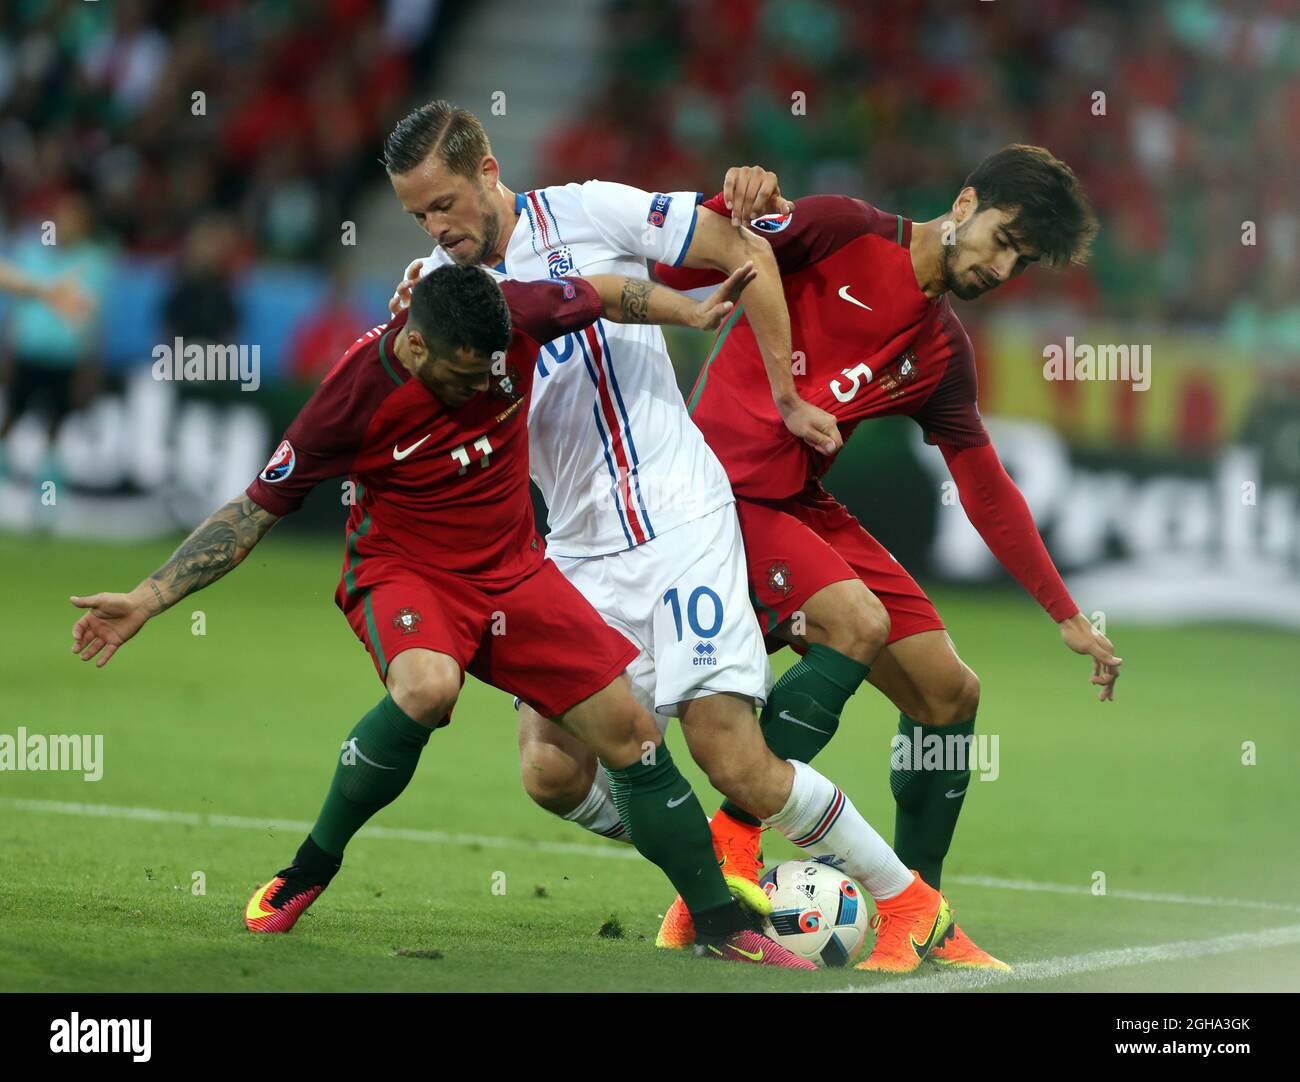 Gylfi Sigurdsson of Iceland tackled by Vieirinha and  Raphael Guerreiro of Portugal during the UEFA European Championship 2016 match at the Stade Geoffroy Guichard, Saint Etienne. Picture date June 15th, 2016 Pic Phil Oldham/Sportimage via PA Images Stock Photo